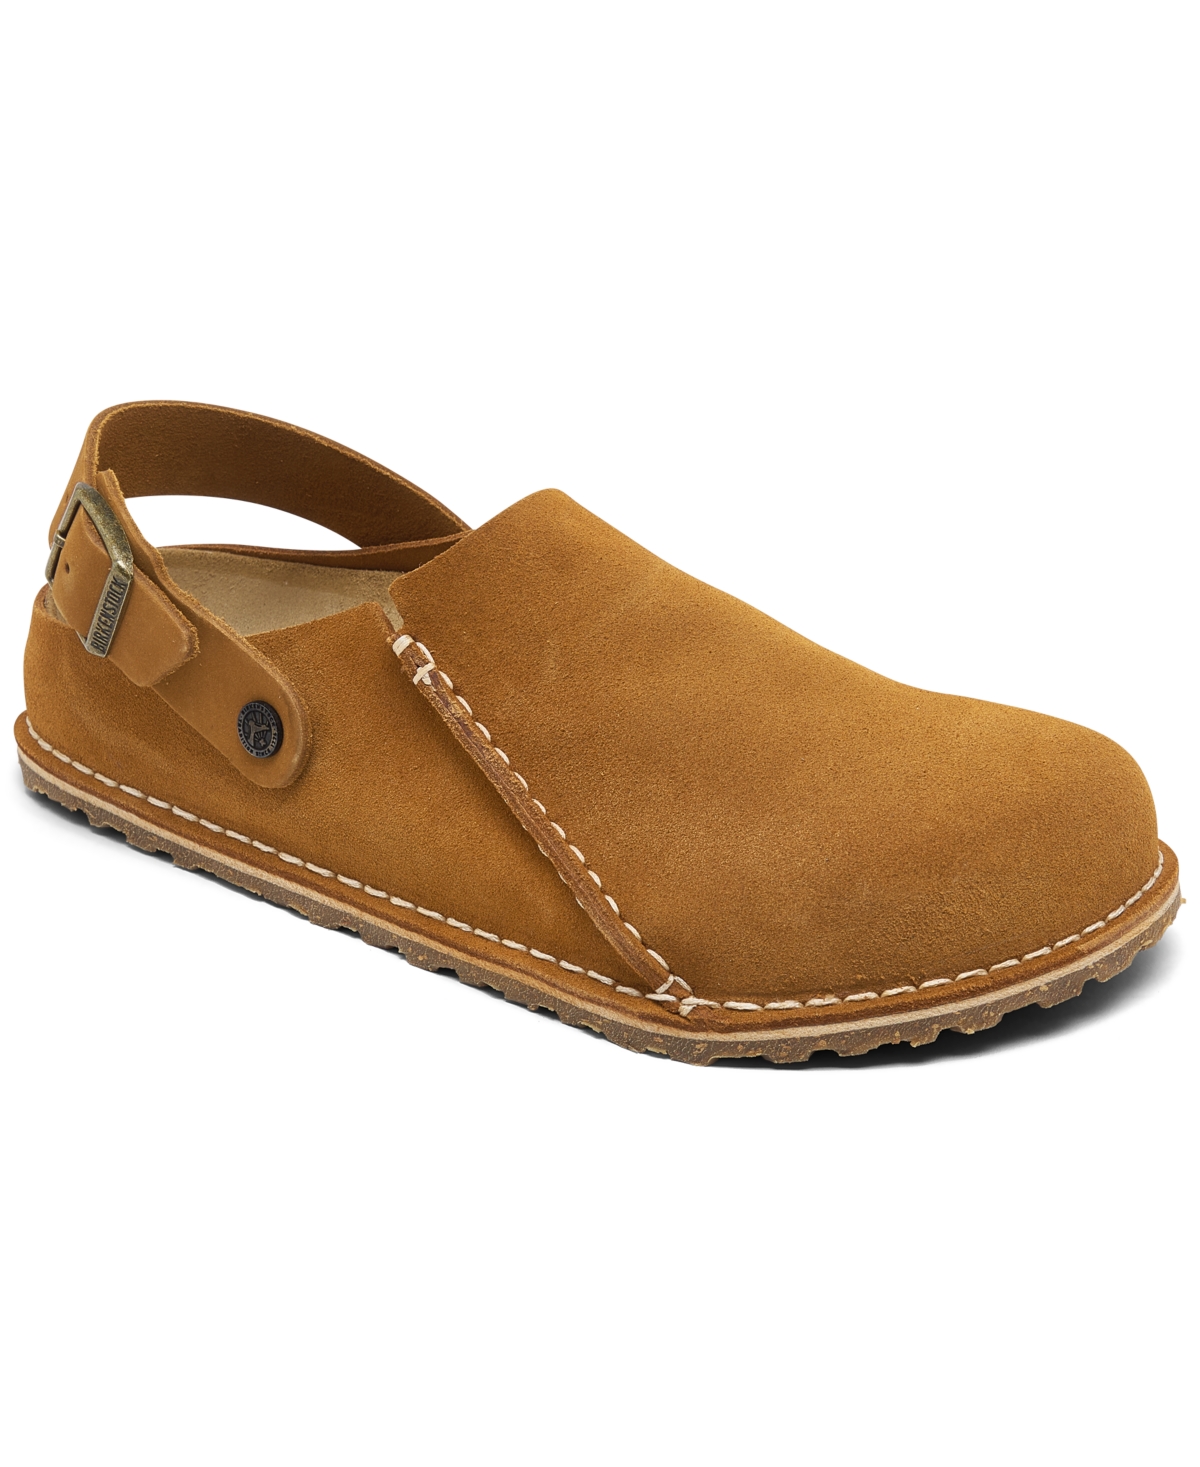 Men's Lutry 365 Suede Clogs from Finish Line - Honey